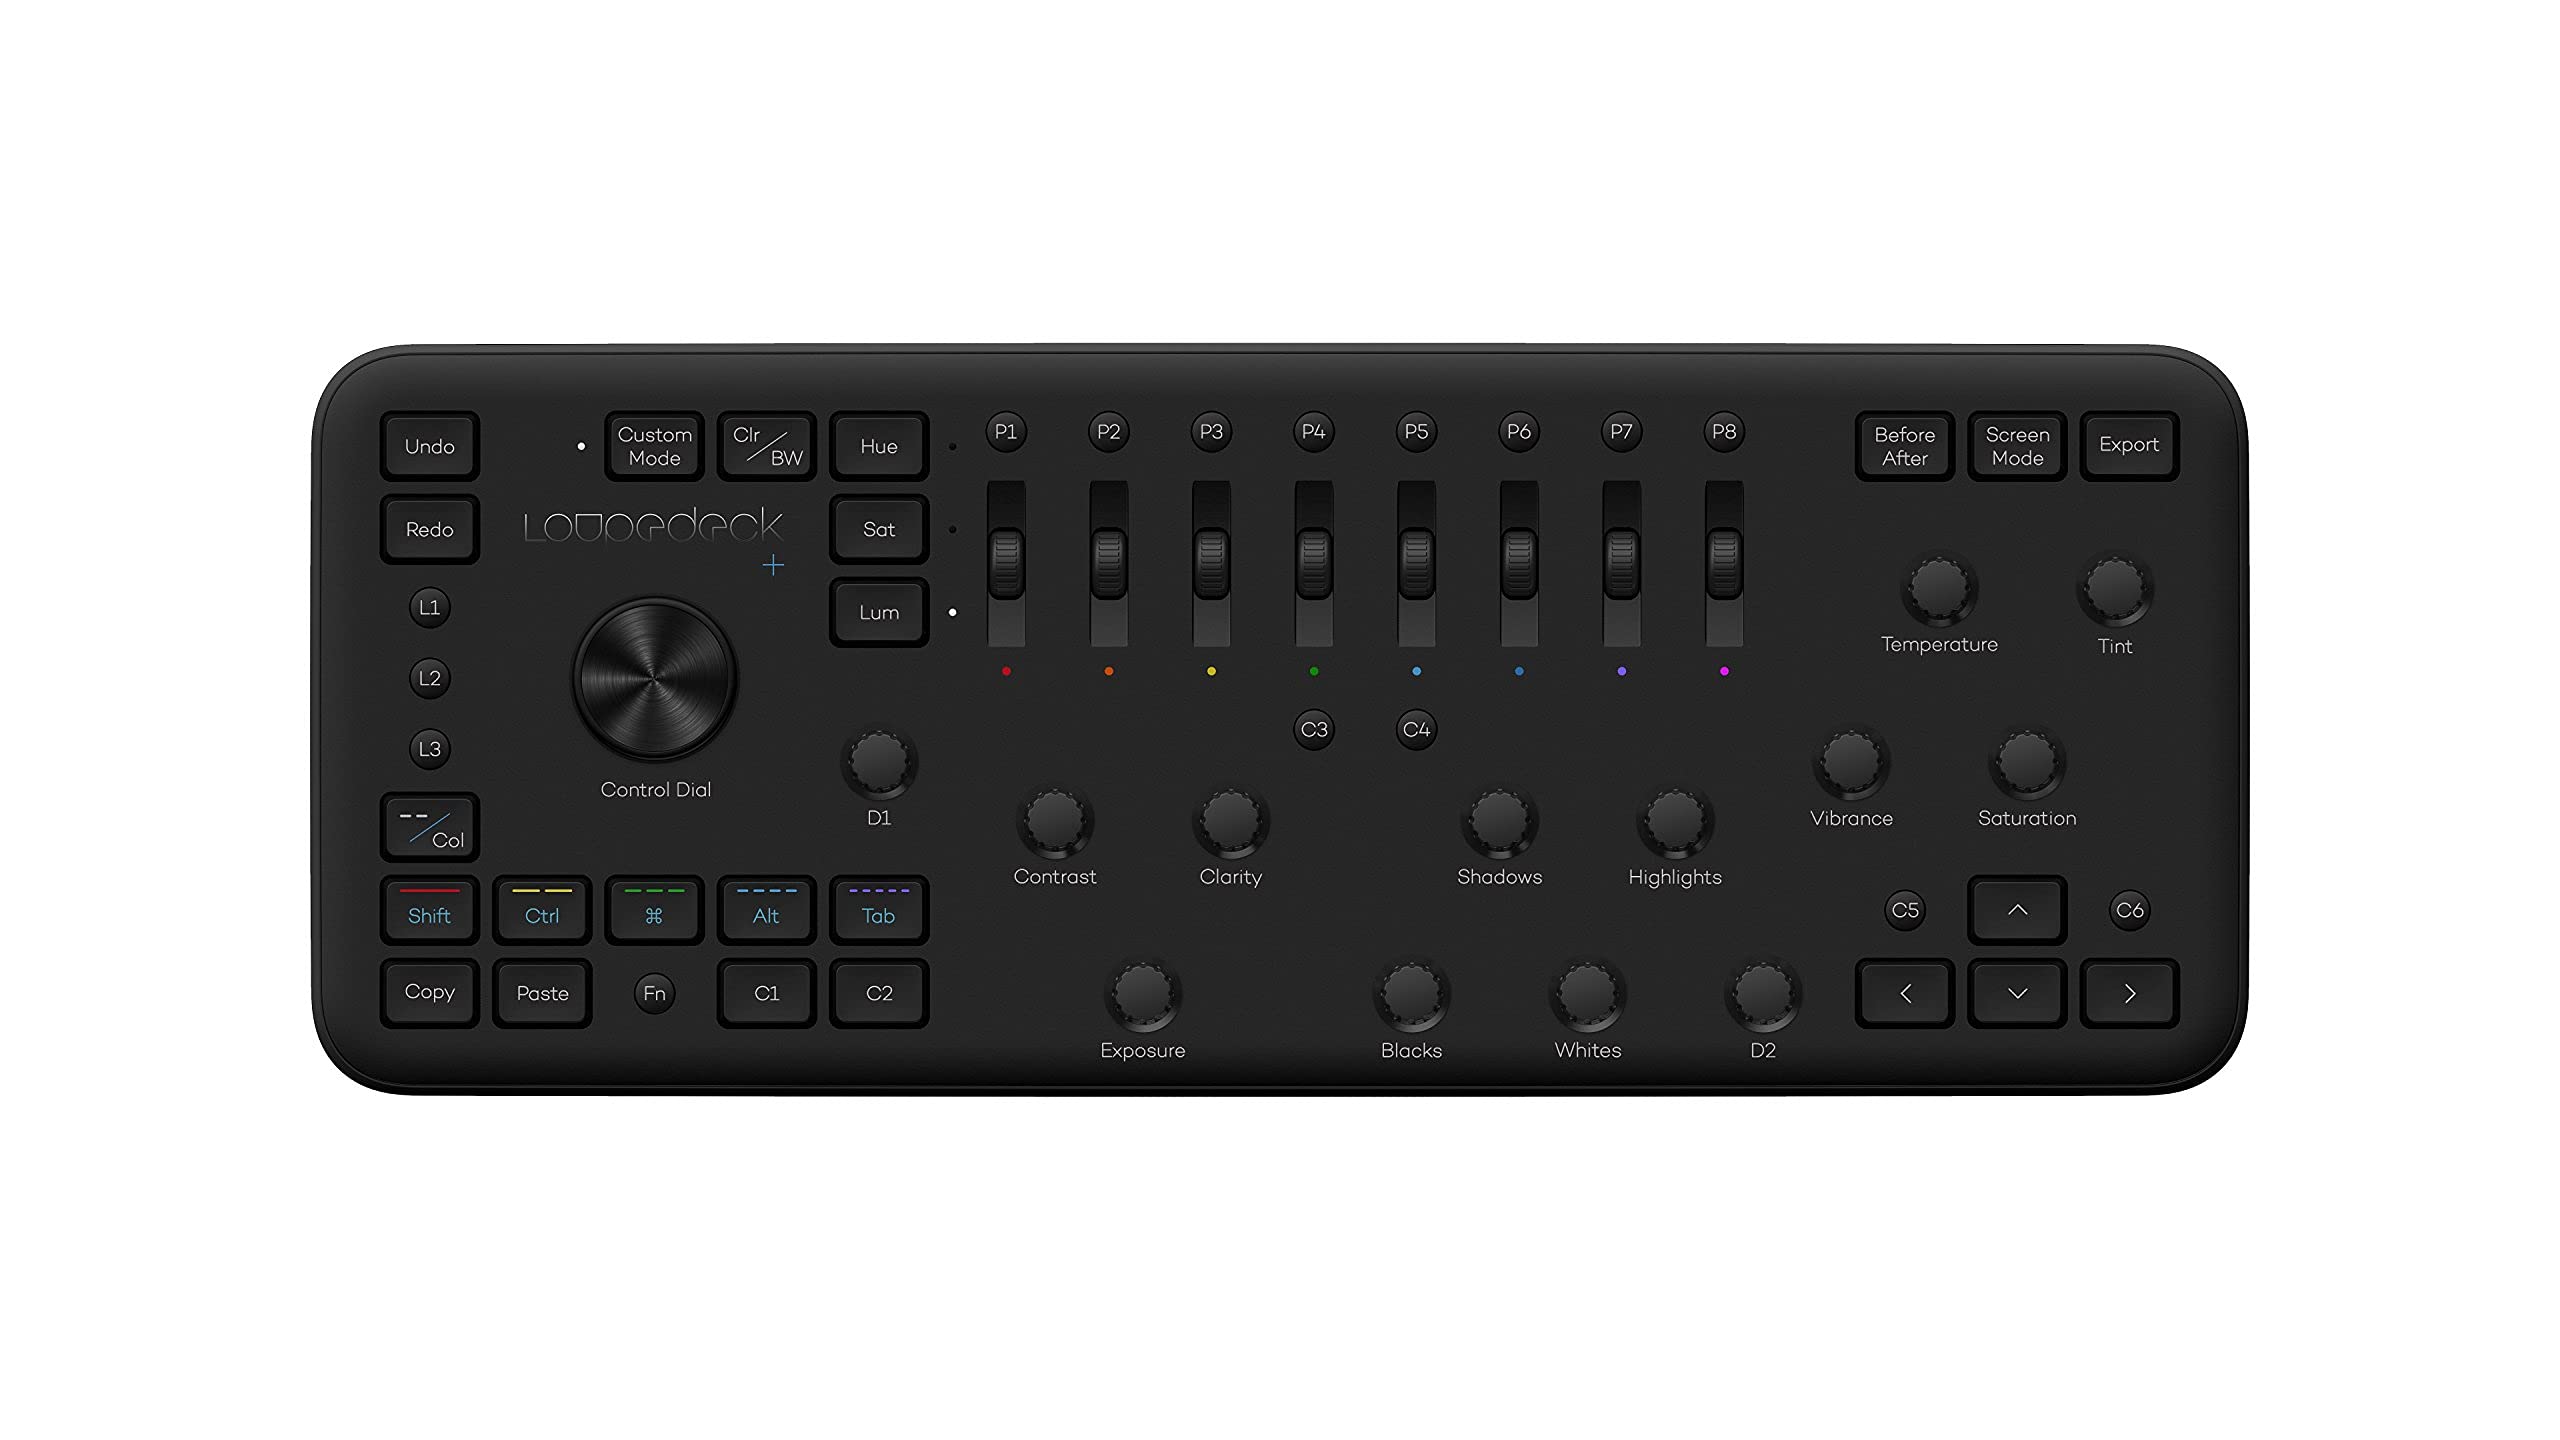 Loupedeck + The Photo and Video Editing Console for Lightroom Classic, Premiere Pro, Final Cut Pro, Photoshop with Camera Raw, After Effects, Audition and Aurora HDR